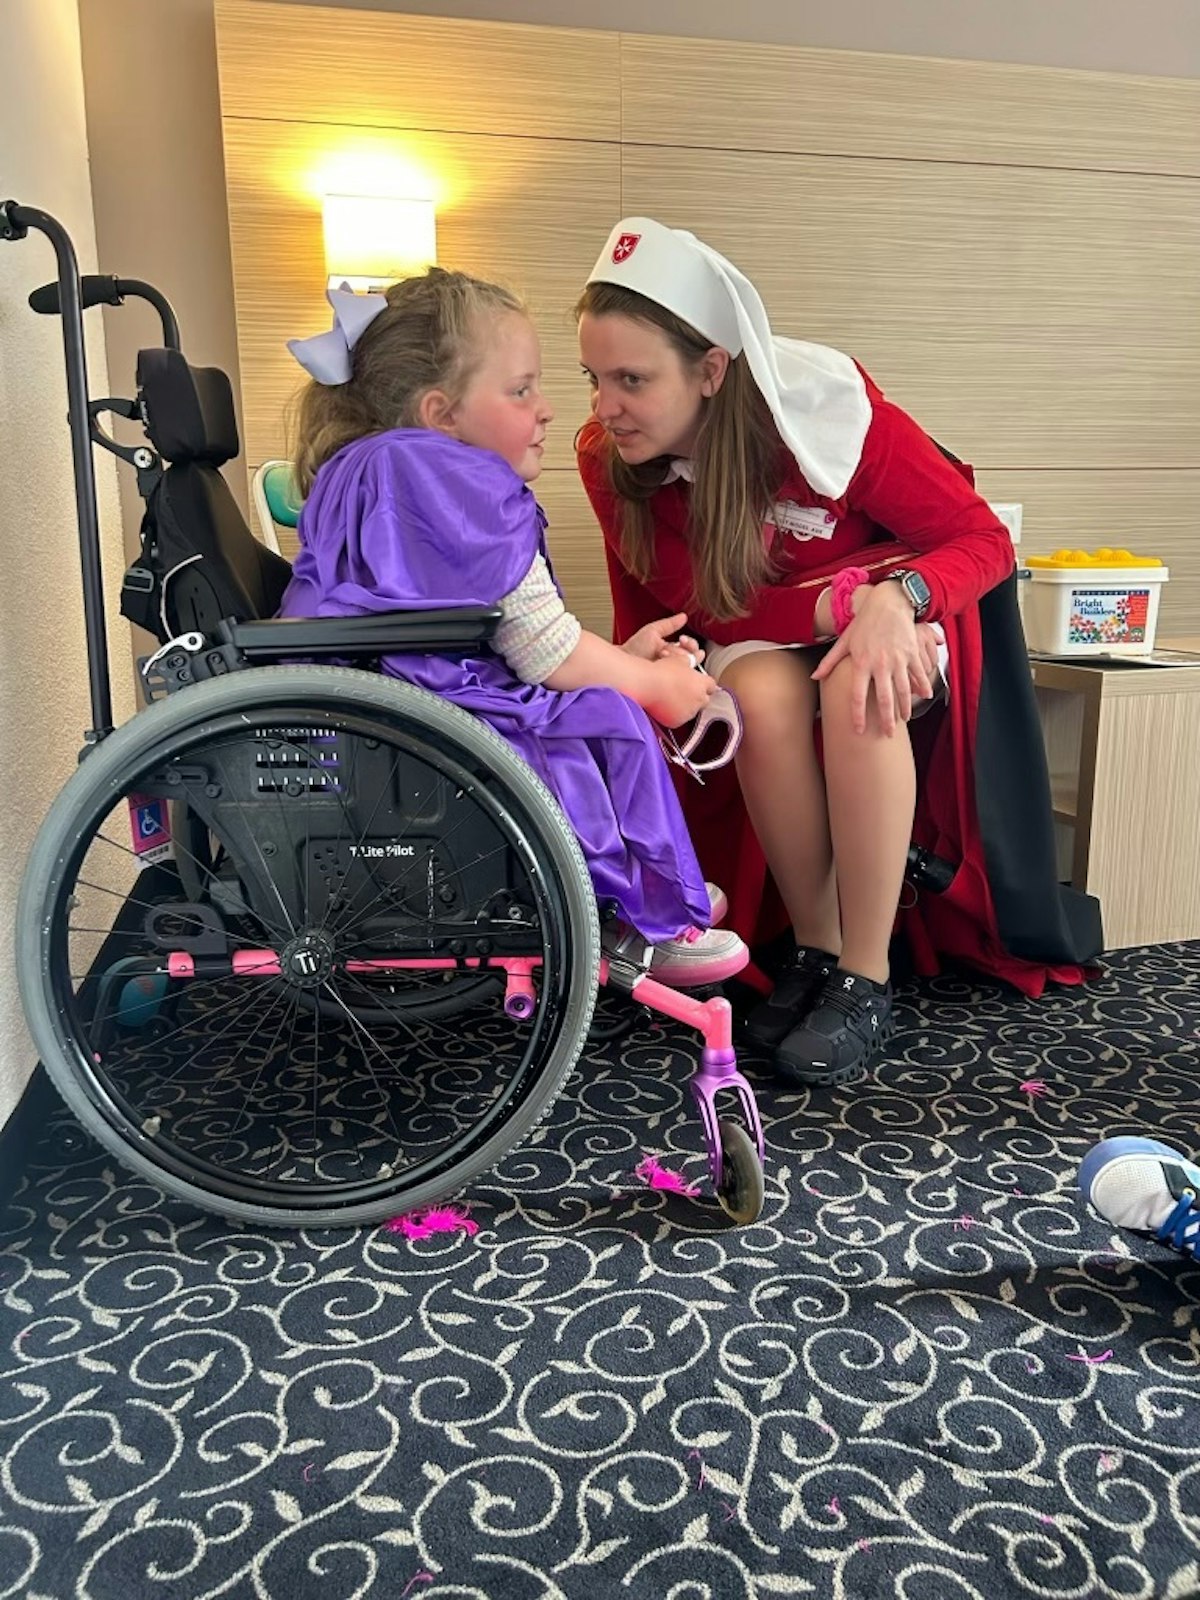 Modes cares for one of the "malades" accompanying the Order of Malta on this year's pilgrimage.  As an adult, she decided to pursue nursing and today helps other children afflicted with illnesses like hers.